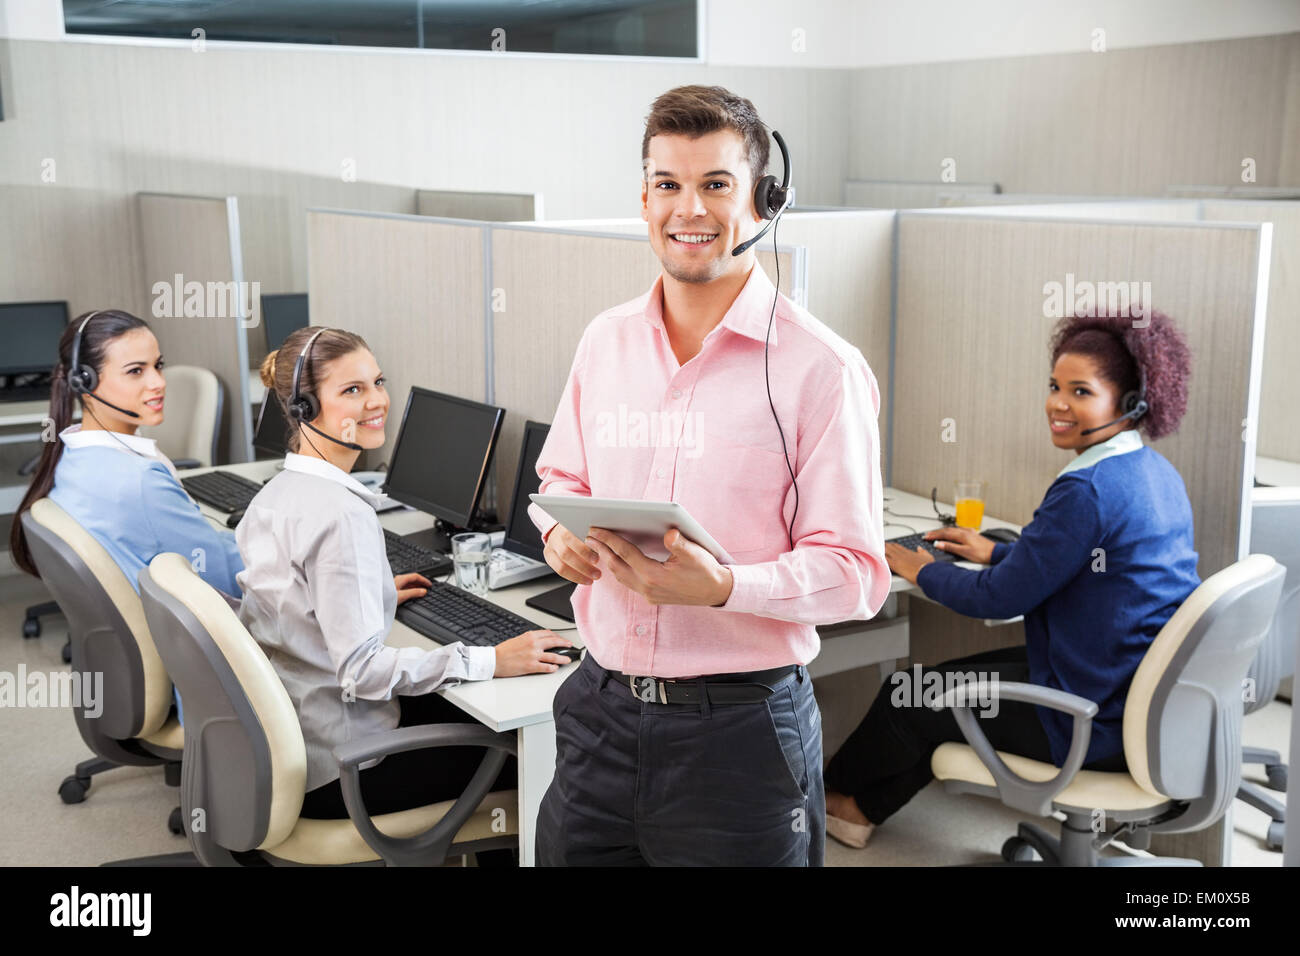 Customer Service Executive Holding Tablet Computer In Call Cente Stock Photo